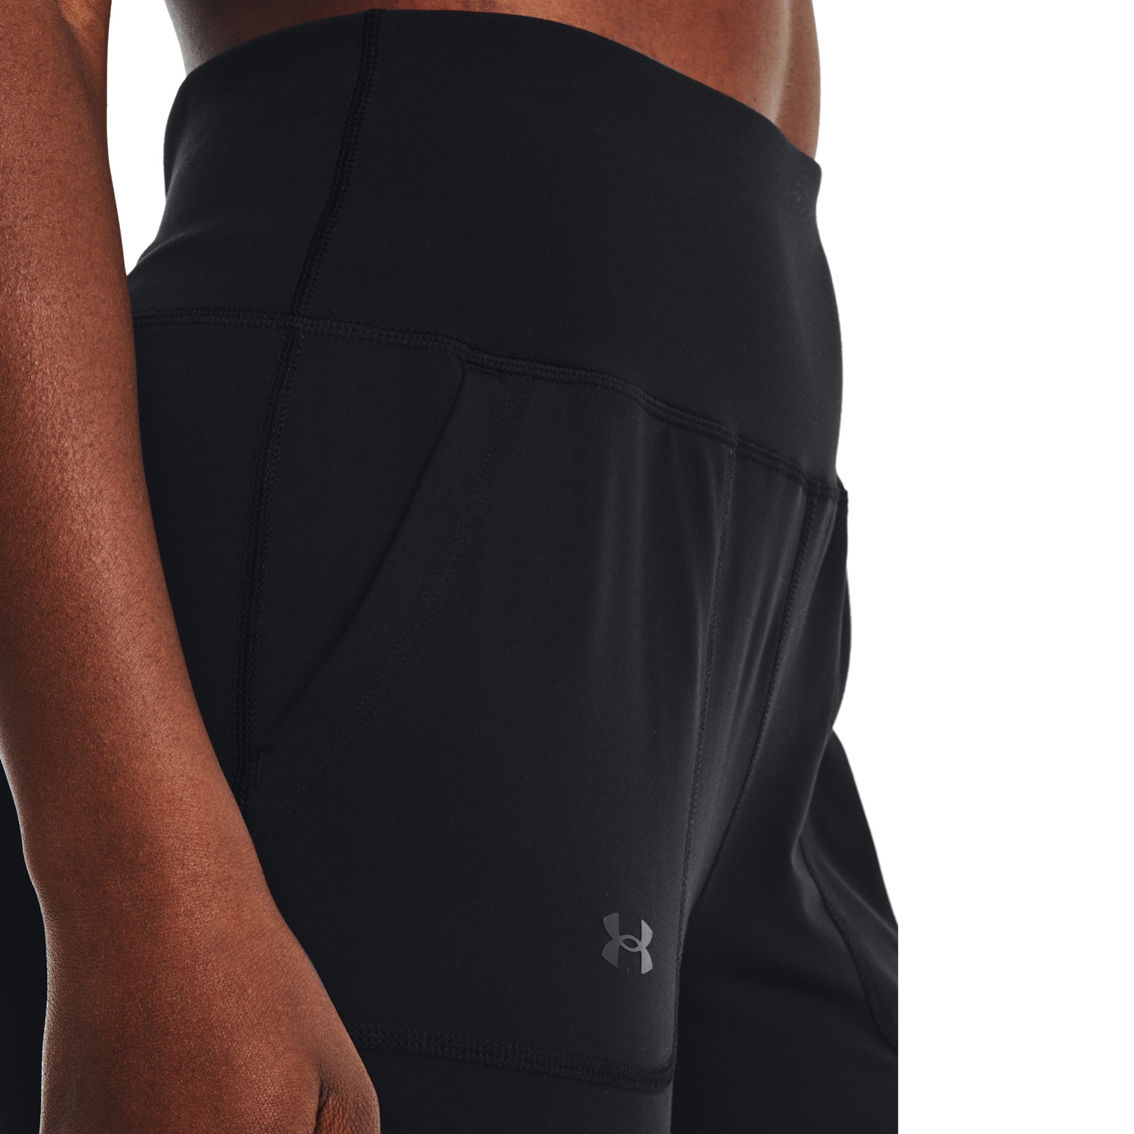 Under Armour UA Motion Jogger Pants - Image 6 of 6